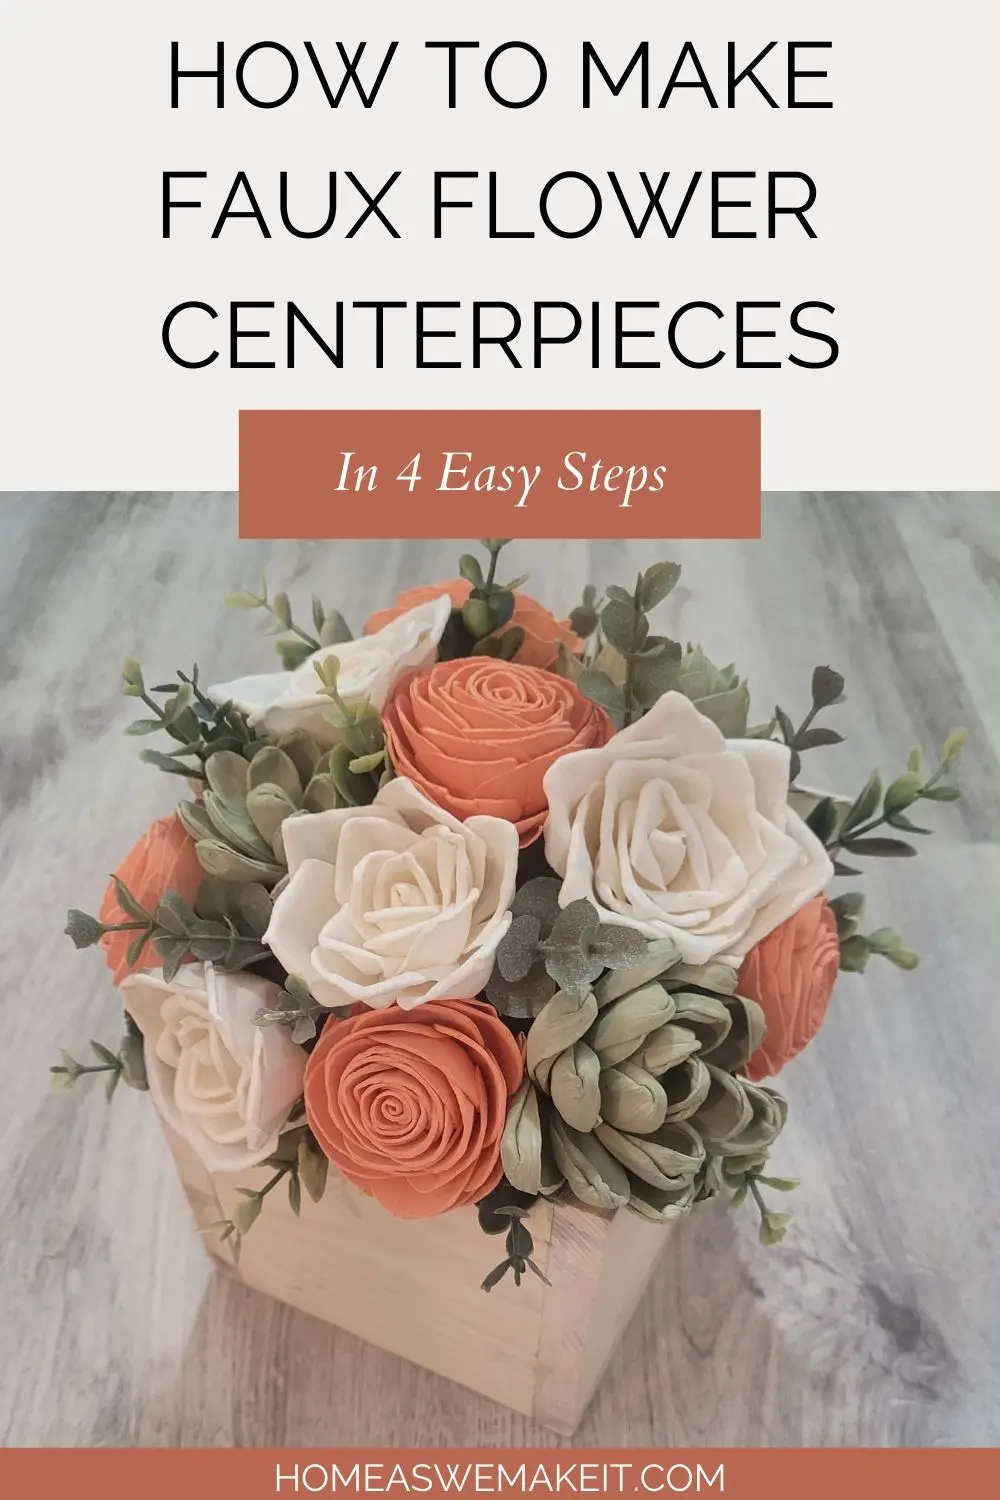 How to Make a Centerpiece Arrangement with Faux Flowers